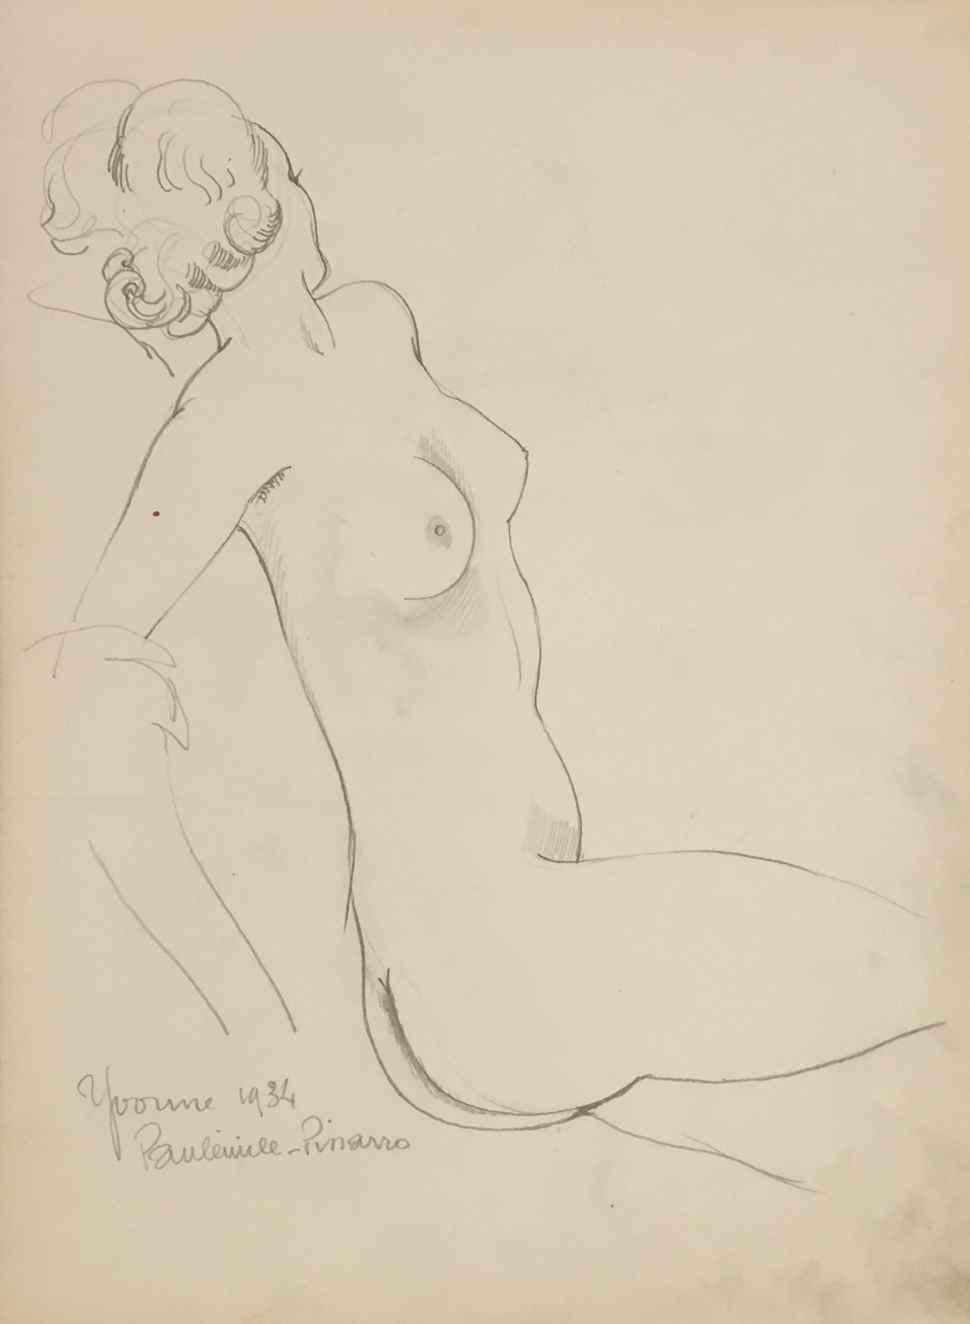 Yvonne Assise by Paulémile Pissarro, 1934 - Graphite on Paper